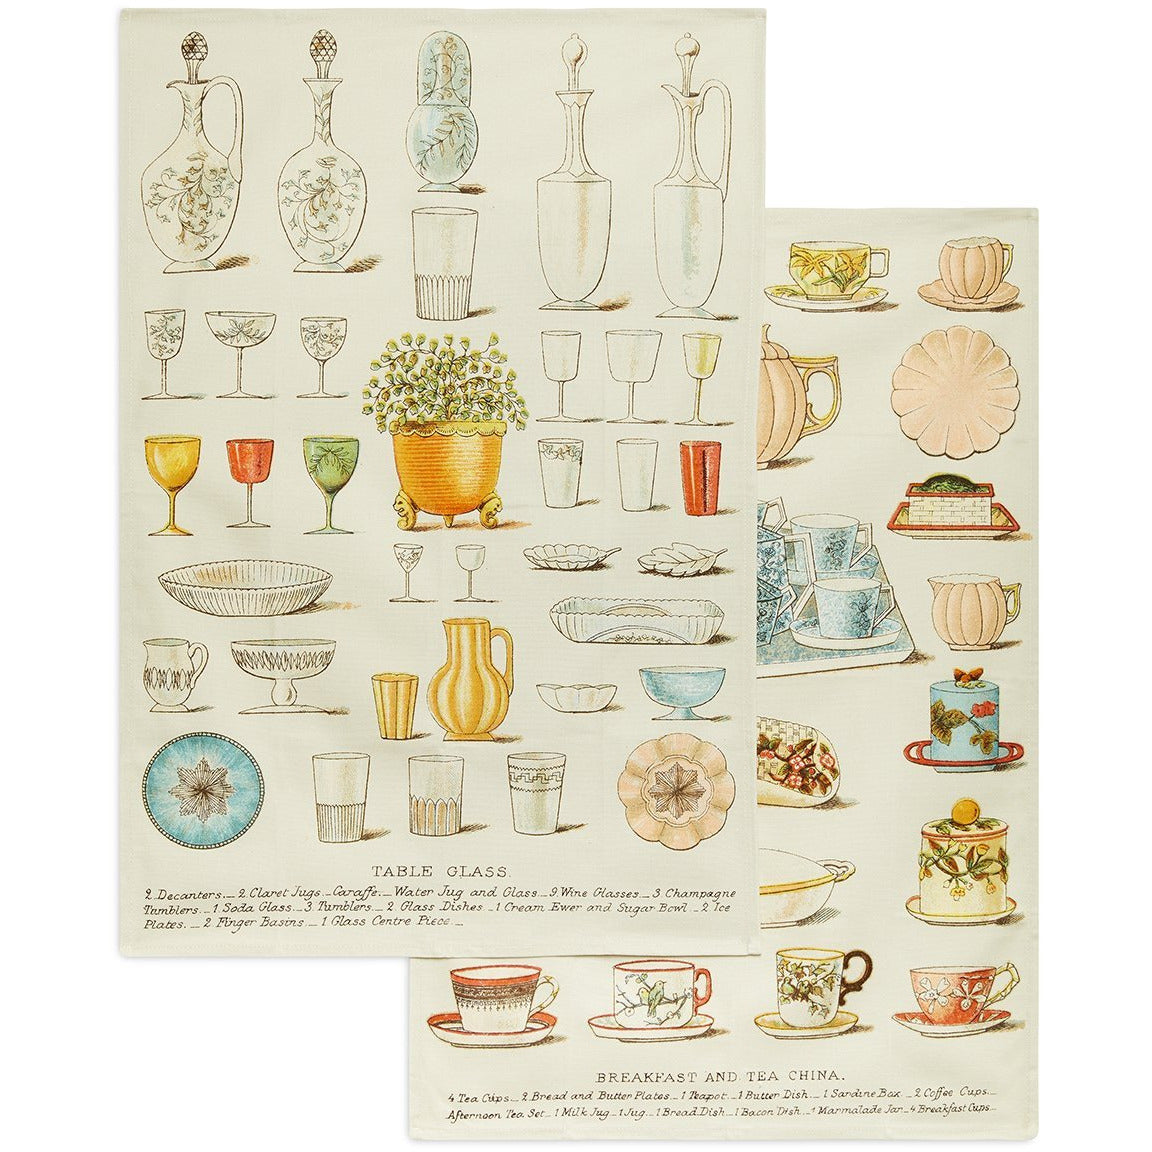 Set of two linen tea towels featuring illustrations of glass tableware and tea china from Victorian book Mrs Beeton's Book of Household Management. From the collection of the Cambridge University Library, brought to you by CuratingCambridge.co.uk